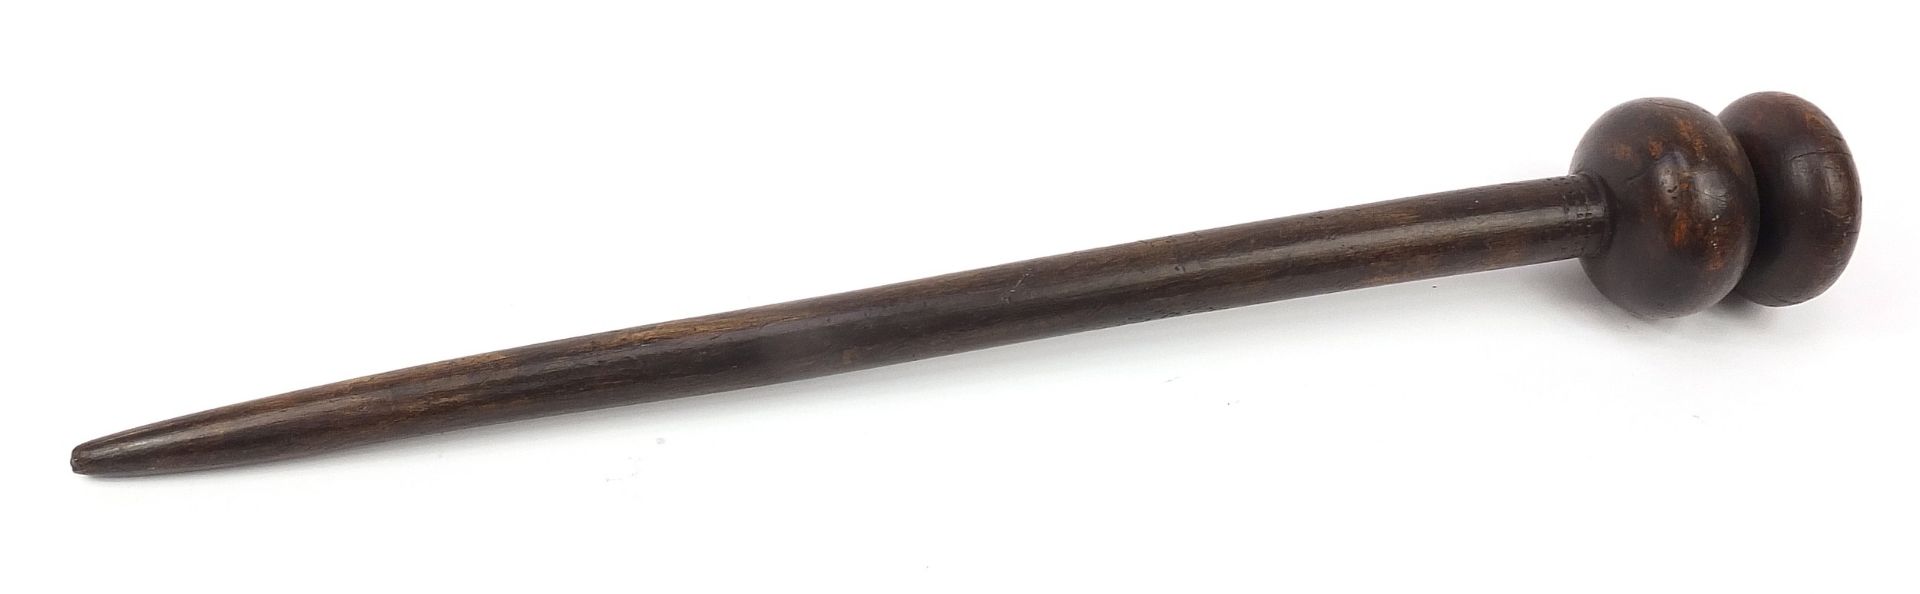 Tribal interest hardwood throwing stick carved with a serpent, 63cm in length